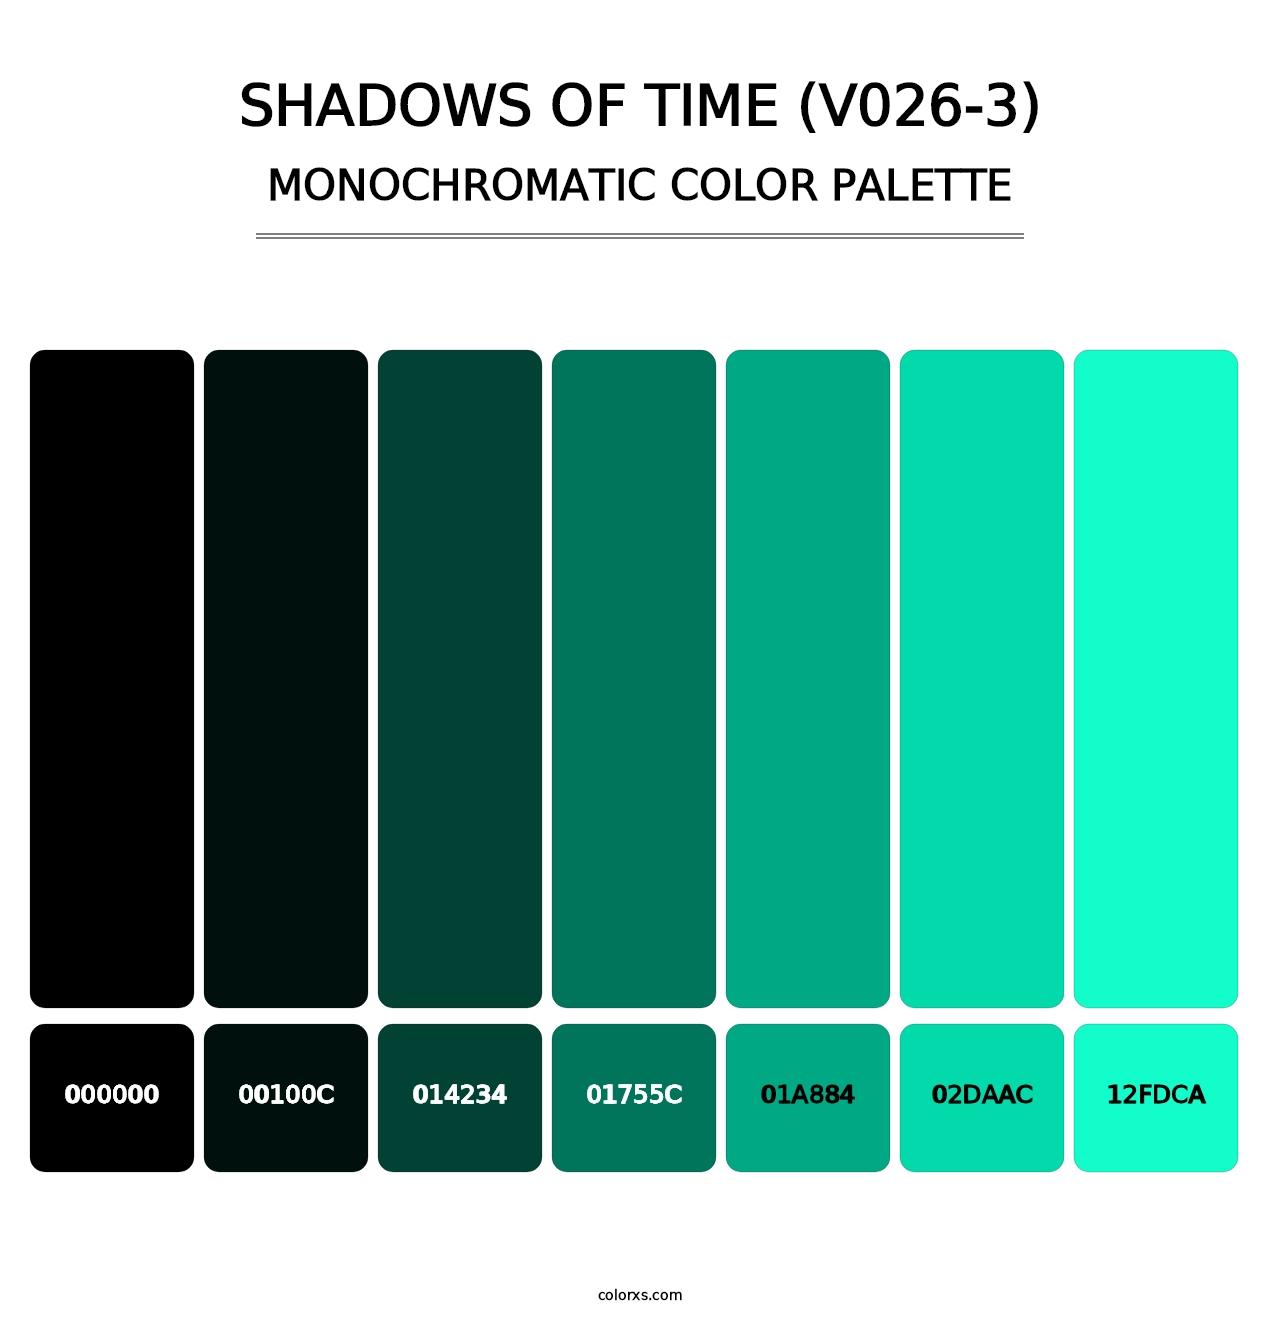 Shadows of Time (V026-3) - Monochromatic Color Palette